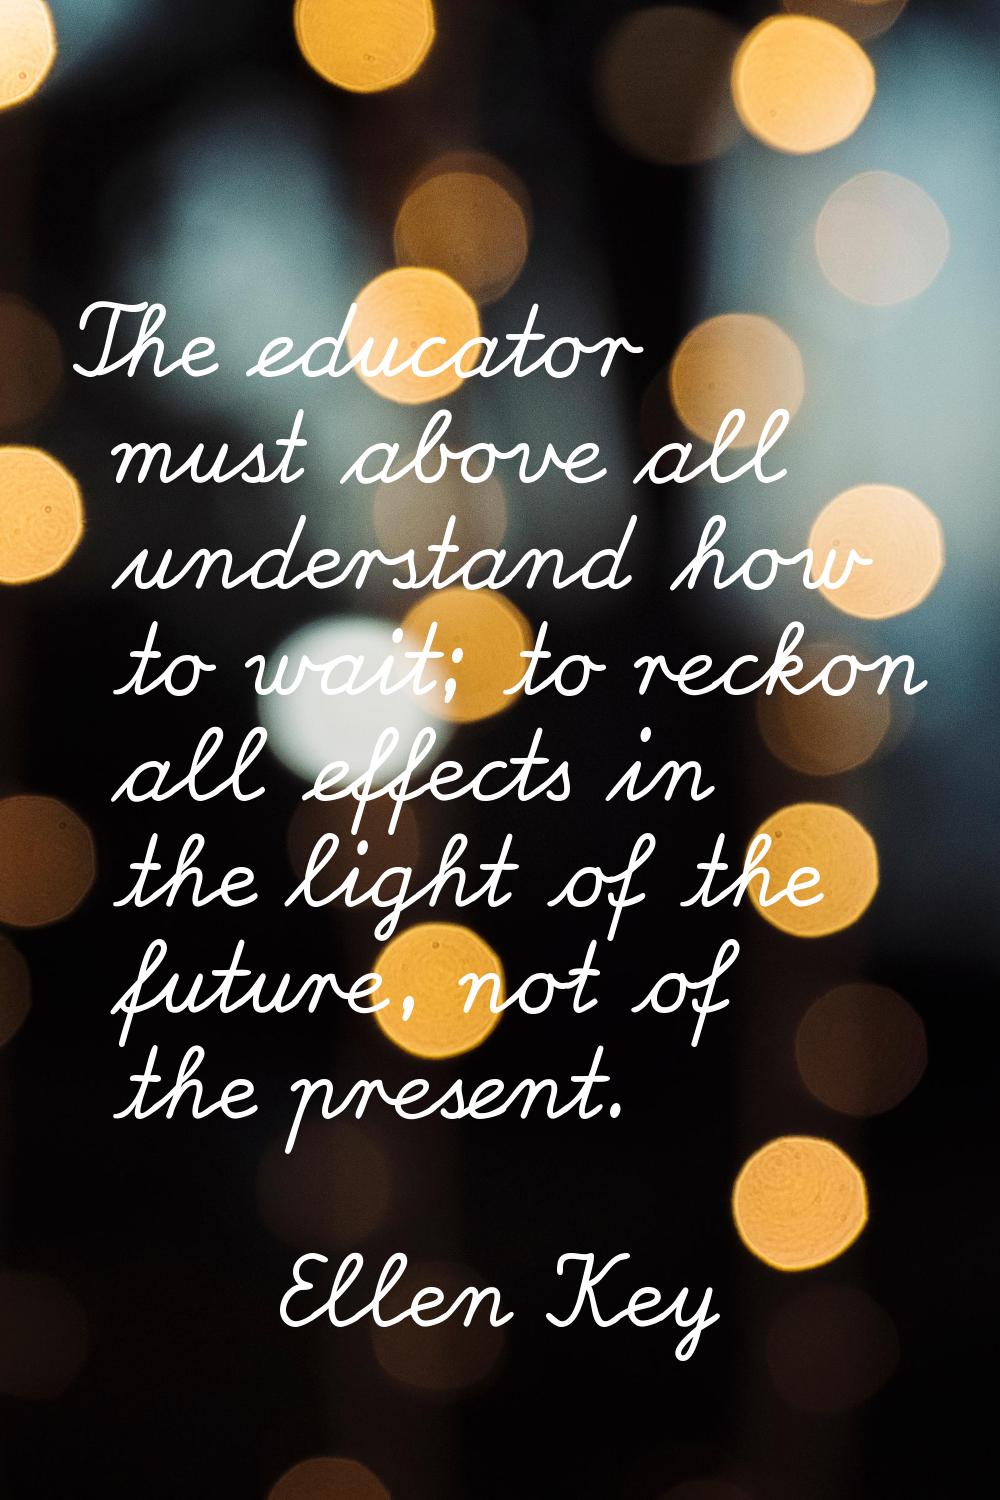 The educator must above all understand how to wait; to reckon all effects in the light of the futur